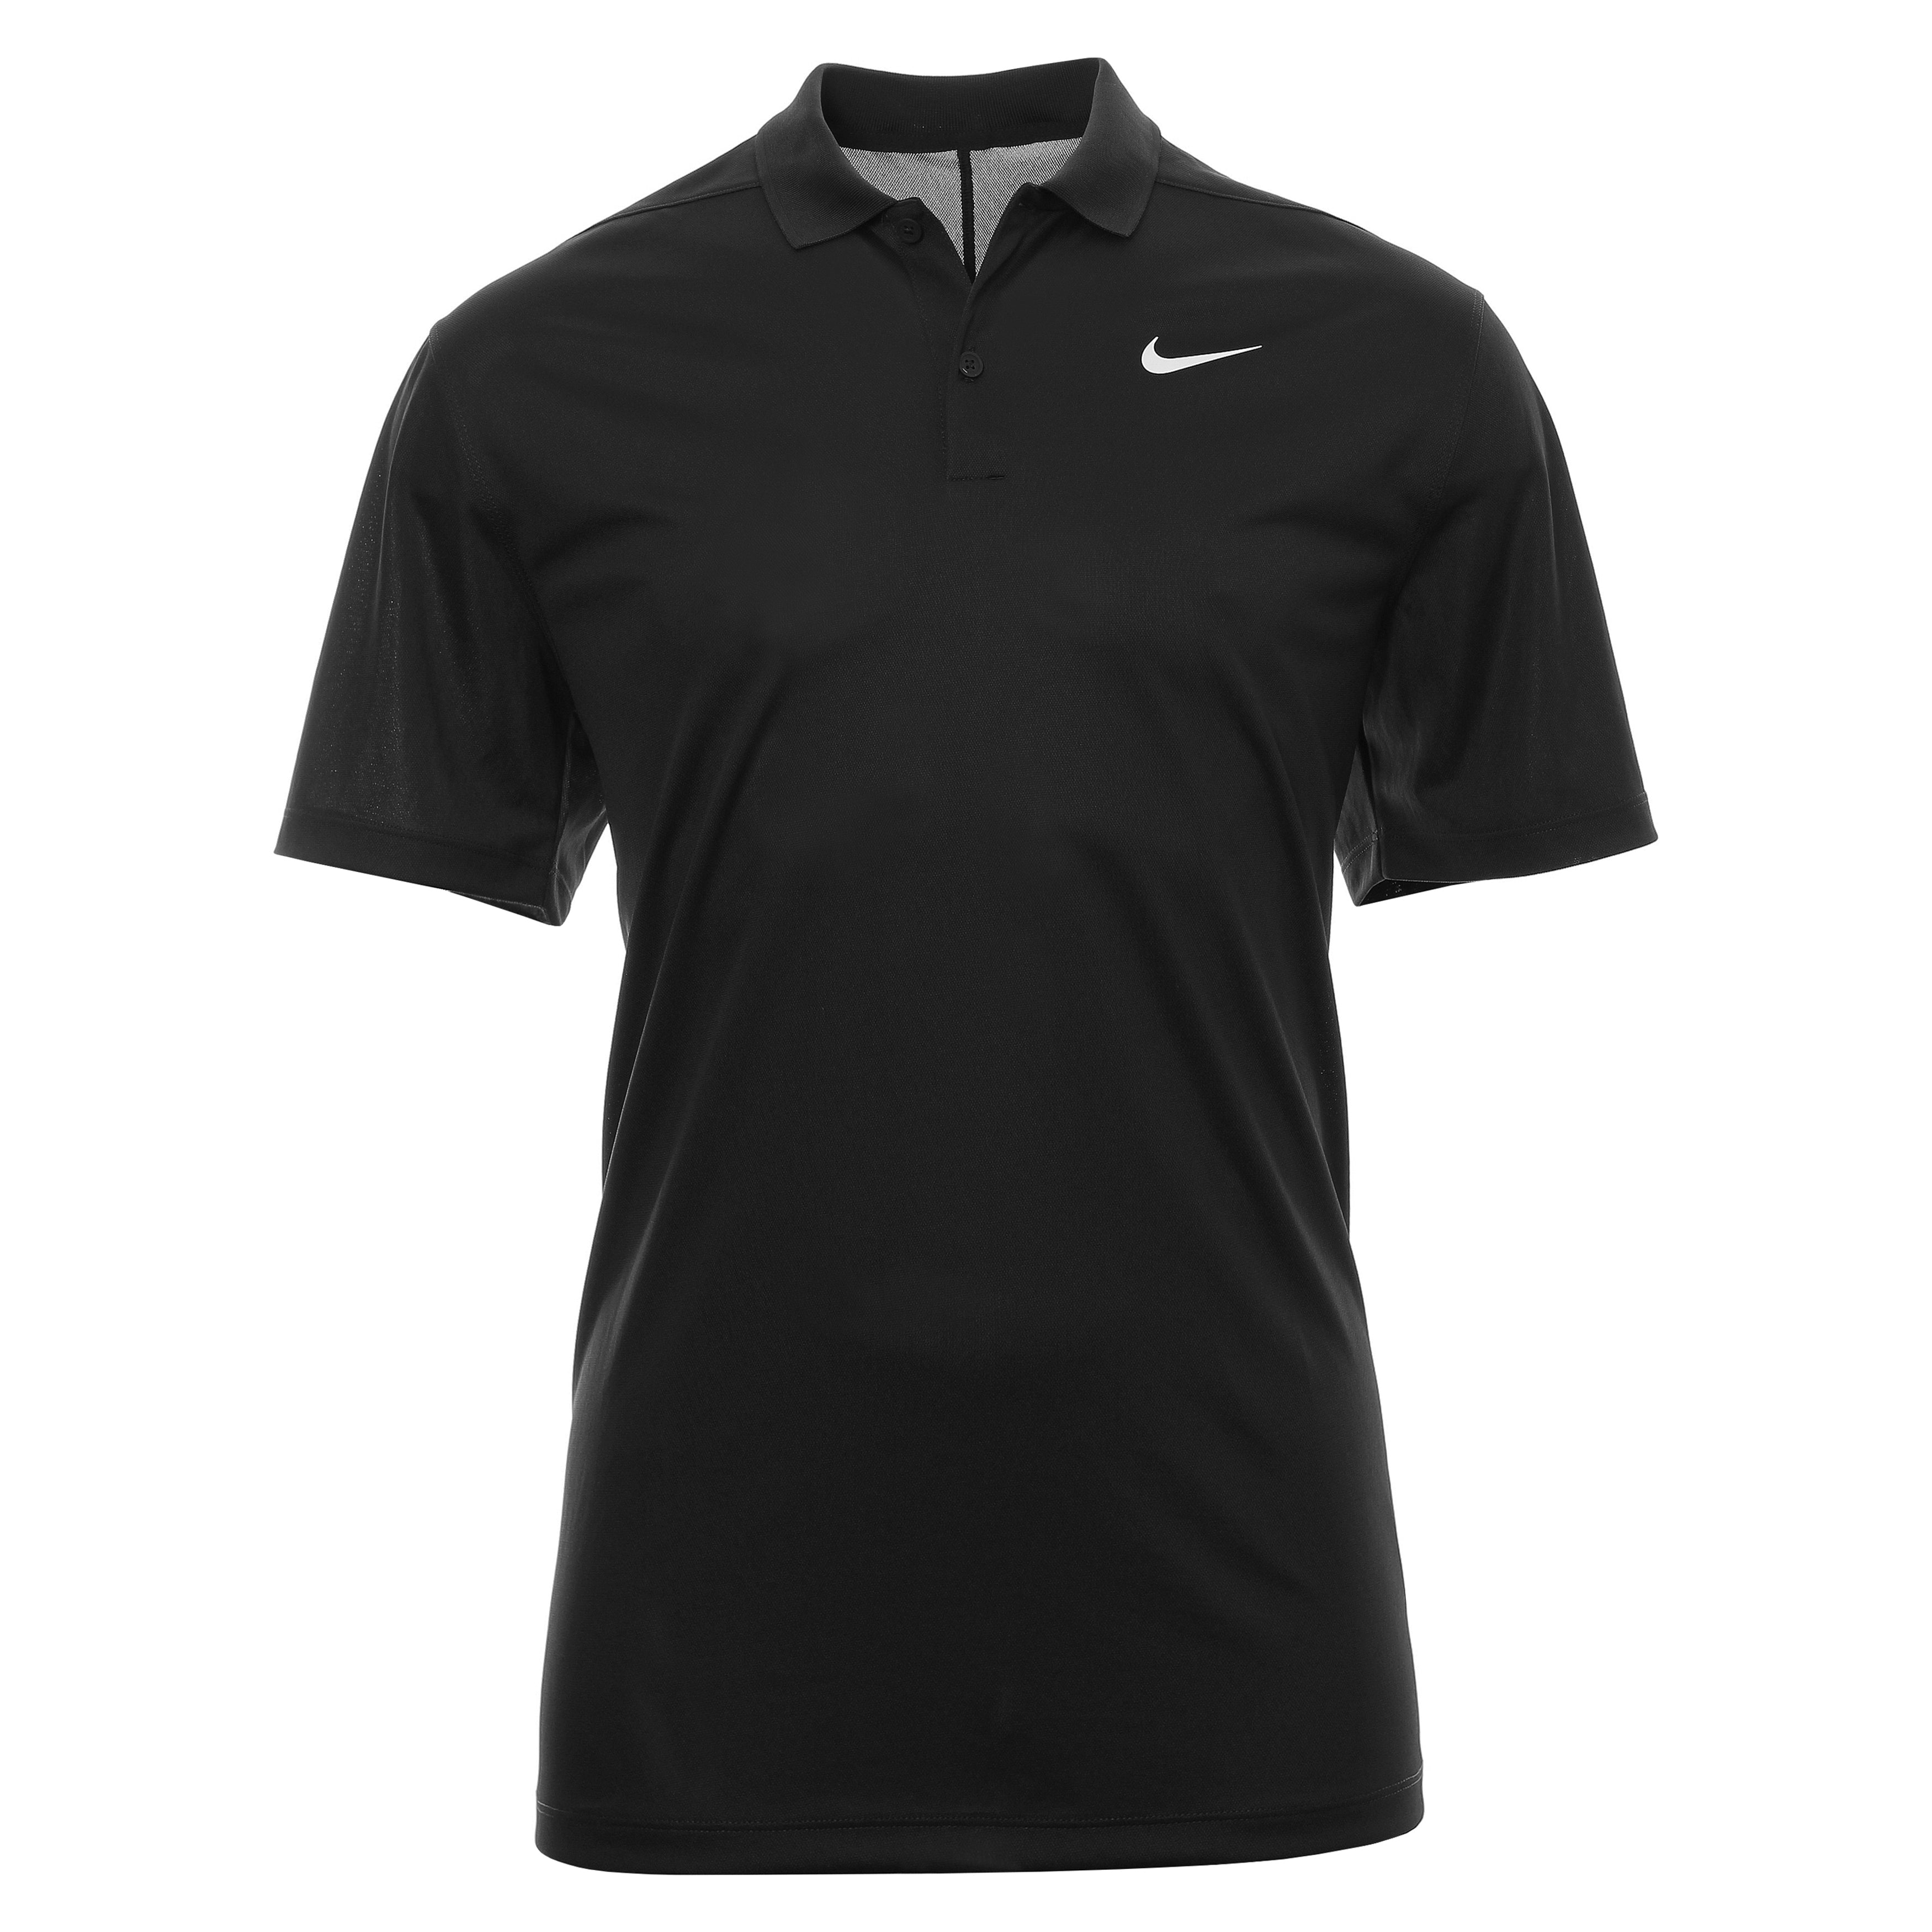 kanker Attent Lunch Nike Golf Dri-Fit Victory Solid Shirt DH0822 Black 010 | Function18